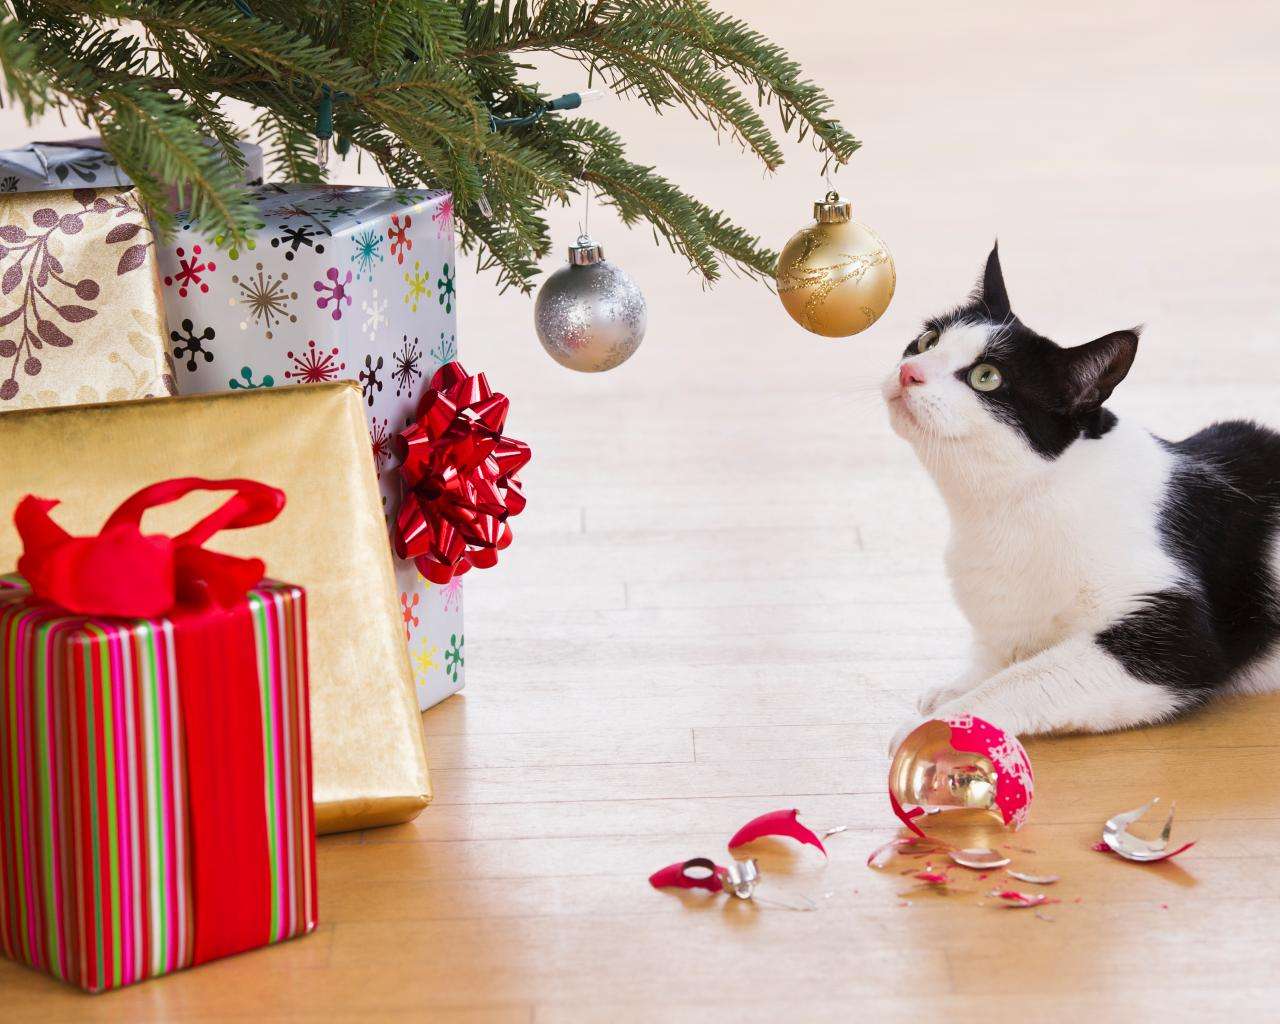 How to Keep Cats Out of Christmas Trees